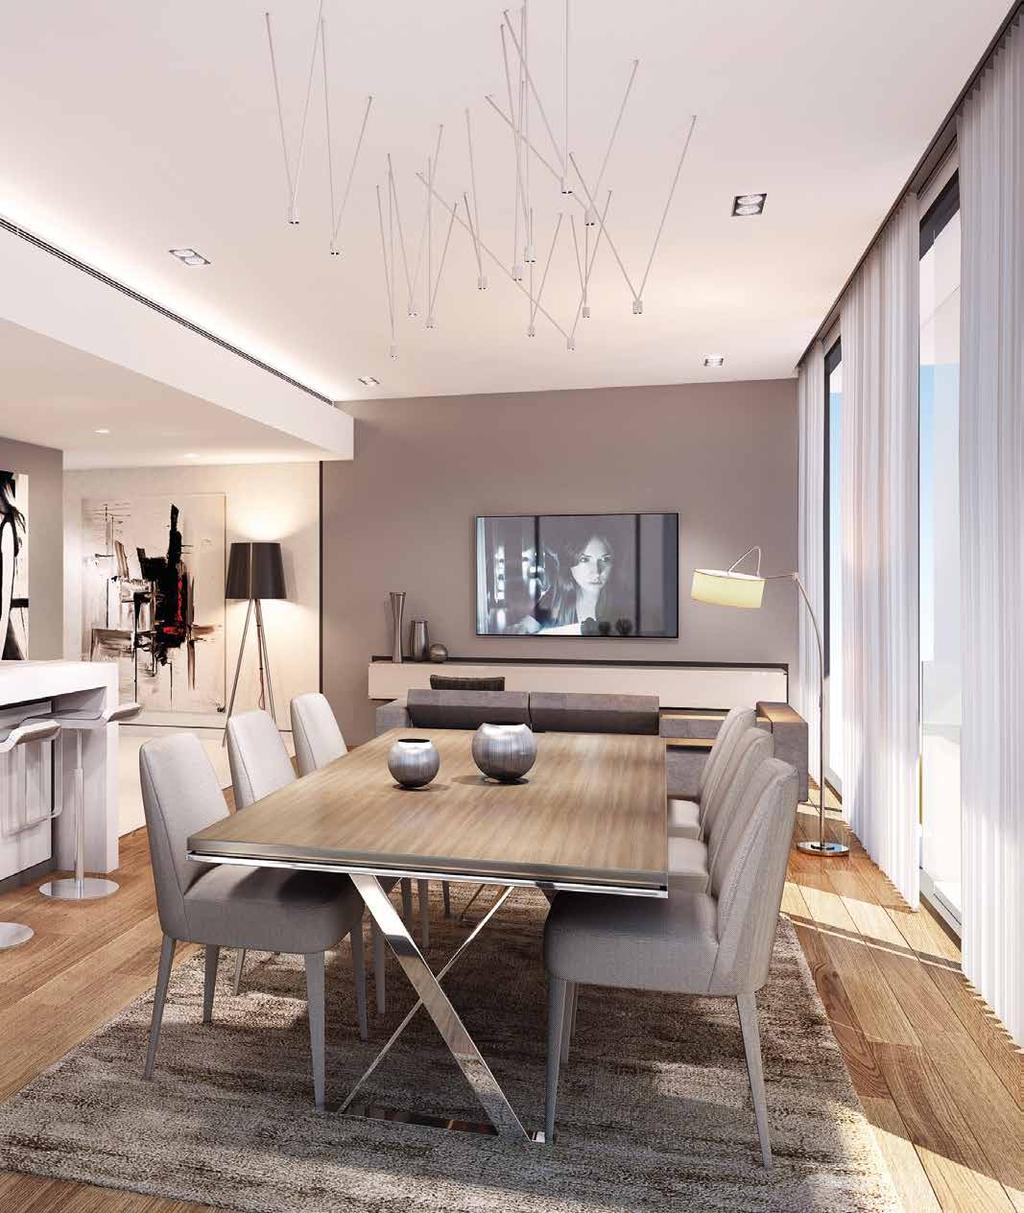 Contemporary living The interiors at Bluewaters residences are finished to the highest standards, with a neutral palette and a minimalist style that combines the warmth of Scandinavian wooden floors